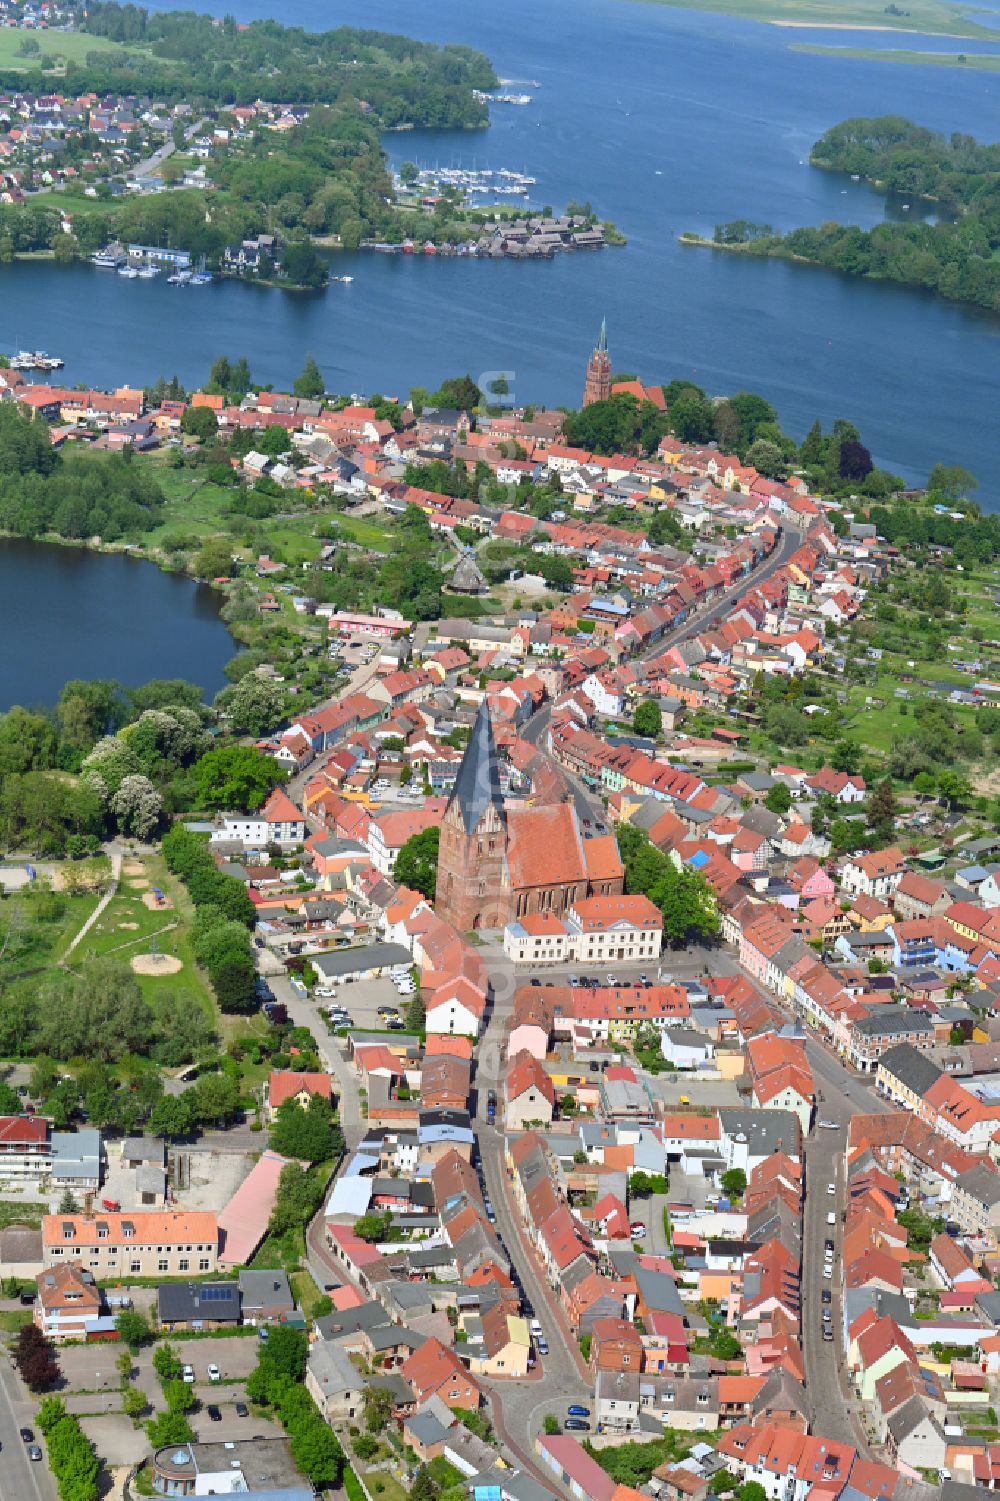 Aerial image Röbel/Müritz - City view of the downtown area on the shore areas of Binnensee in Roebel/Mueritz in the state Mecklenburg - Western Pomerania, Germany